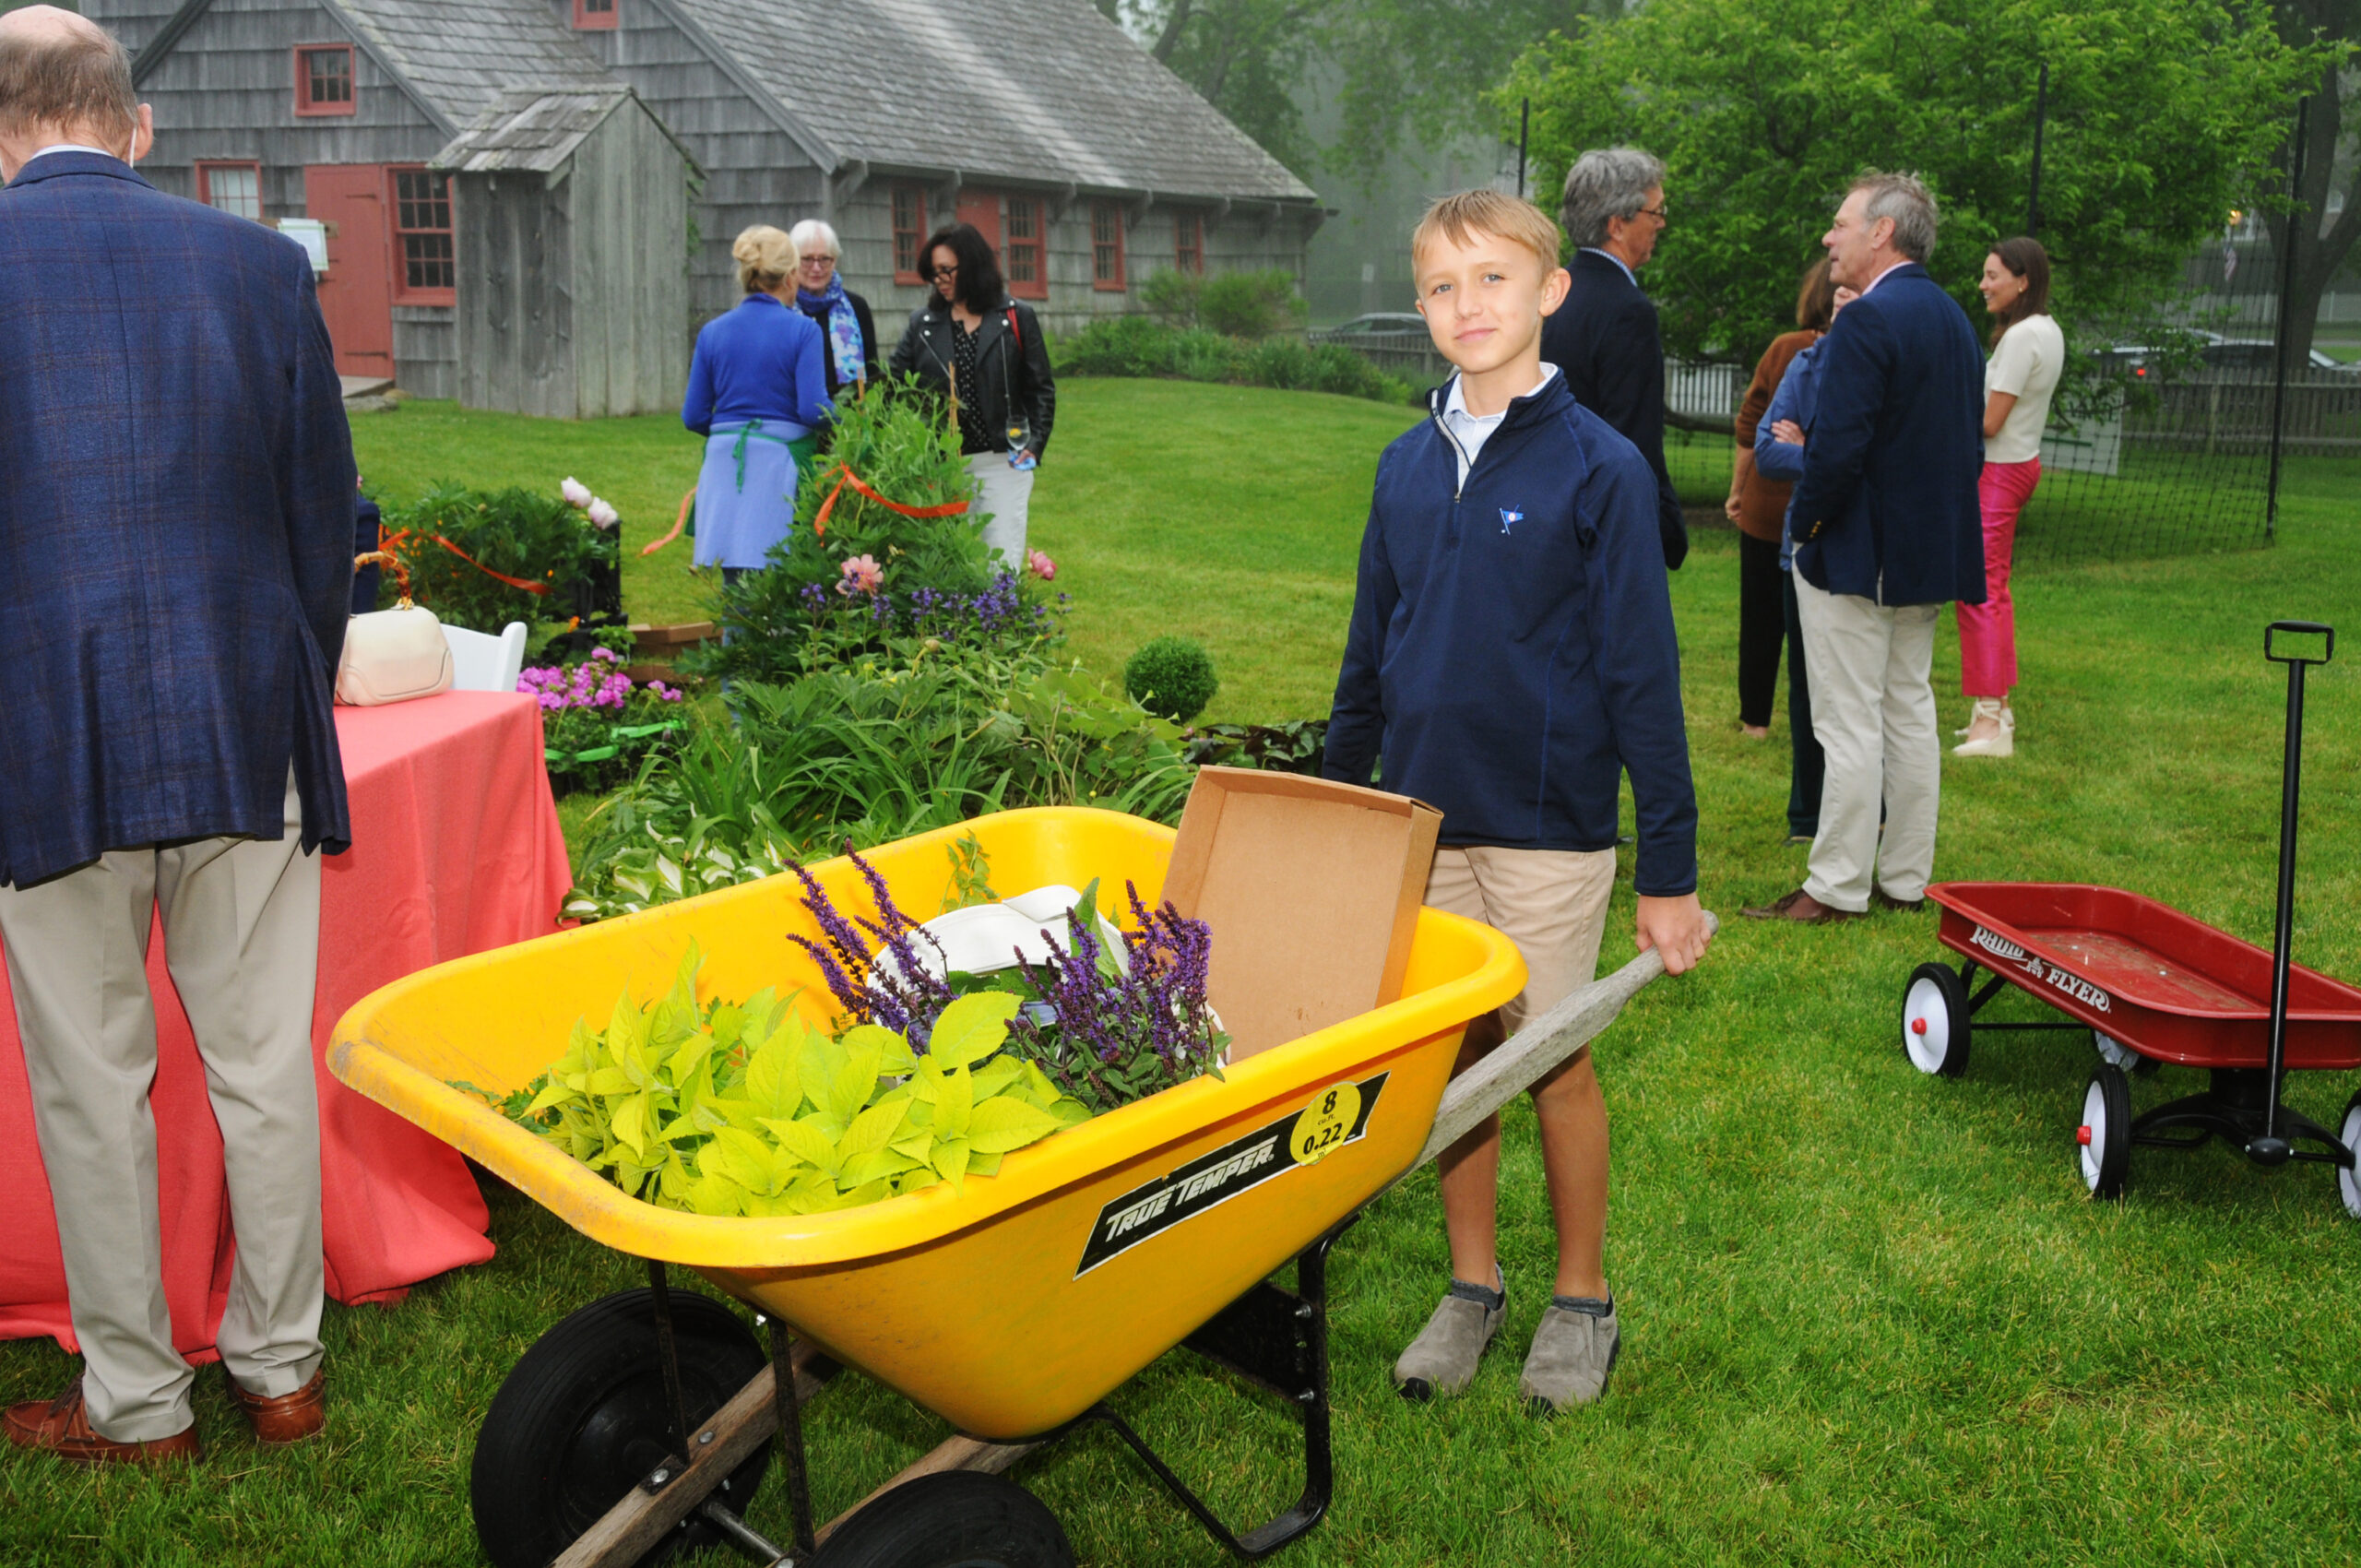 Charlie Lockwood at the Garden Club of East Hampton's 46th Annual Garden Party and Plant Sale at Mulford Farm on Friday evening.  RICHARD LEWIN